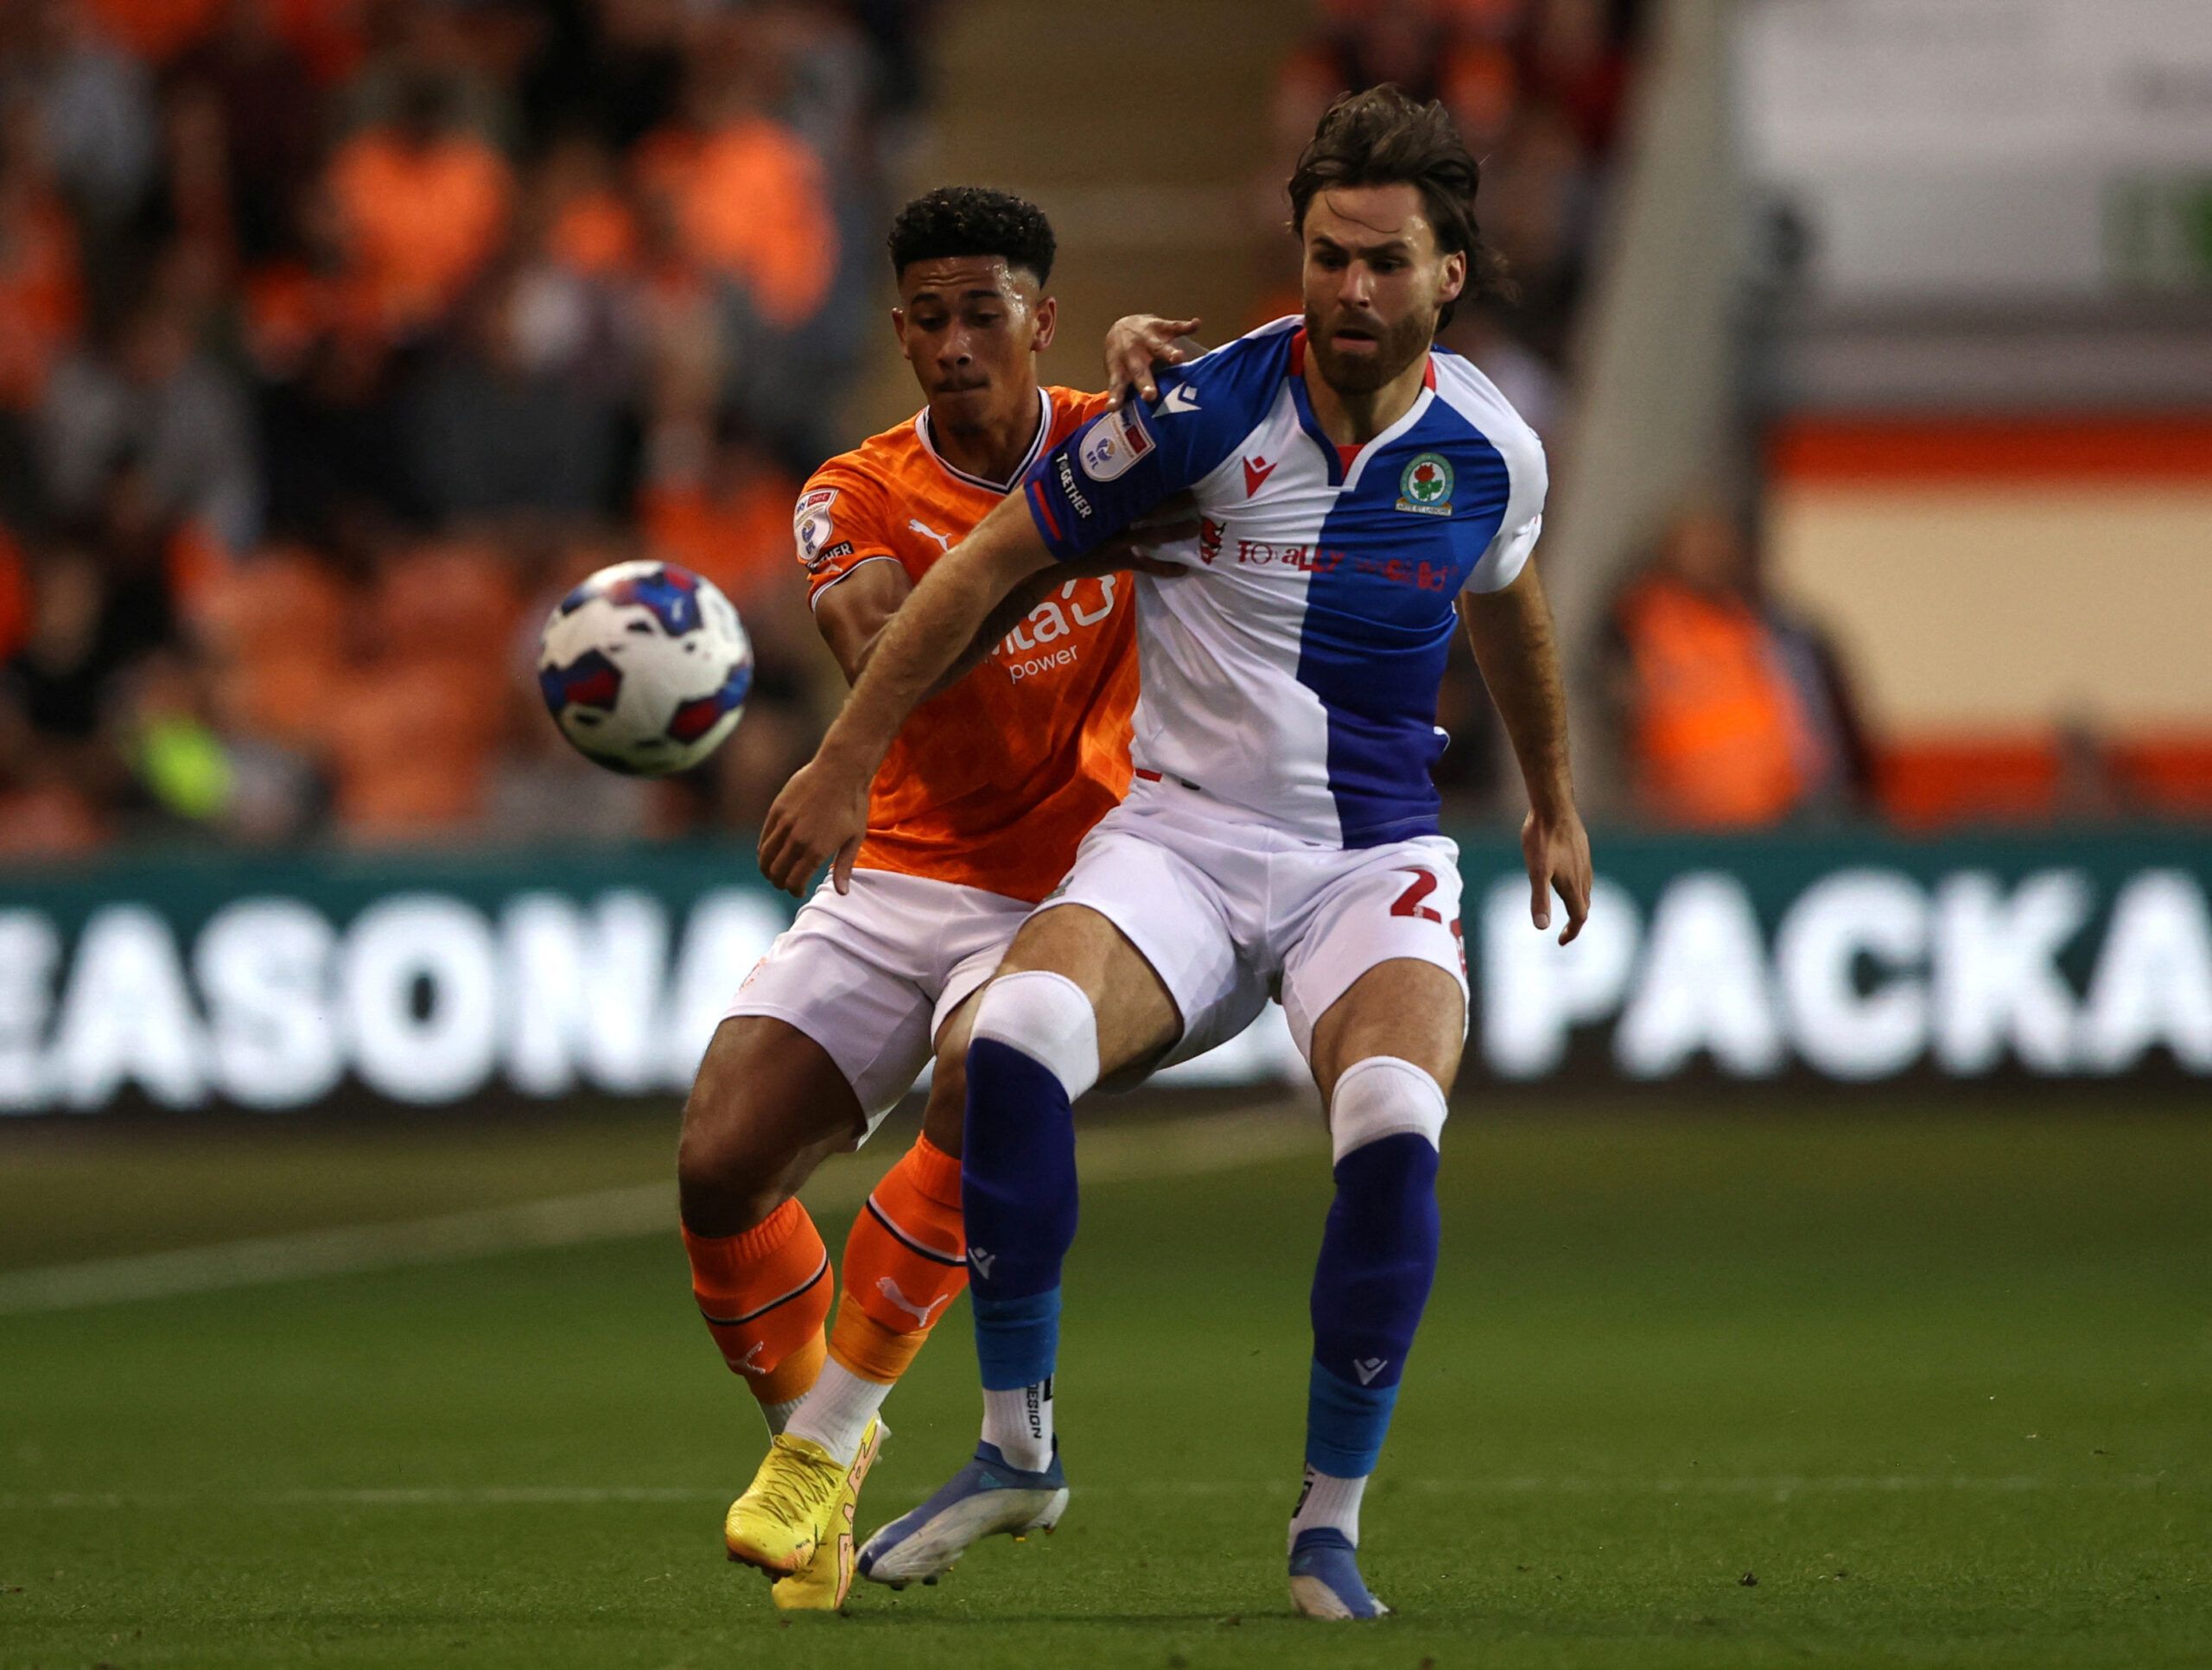 Soccer Football - Championship - Blackpool v Blackburn Rovers - Bloomfield Road, Blackpool, Britain - August 31, 2022 Blackpool's Jordan Gabriel in action with Blackburn Rovers' Ben Brereton Diaz  Action Images/Molly Darlington  EDITORIAL USE ONLY. No use with unauthorized audio, video, data, fixture lists, club/league logos or 